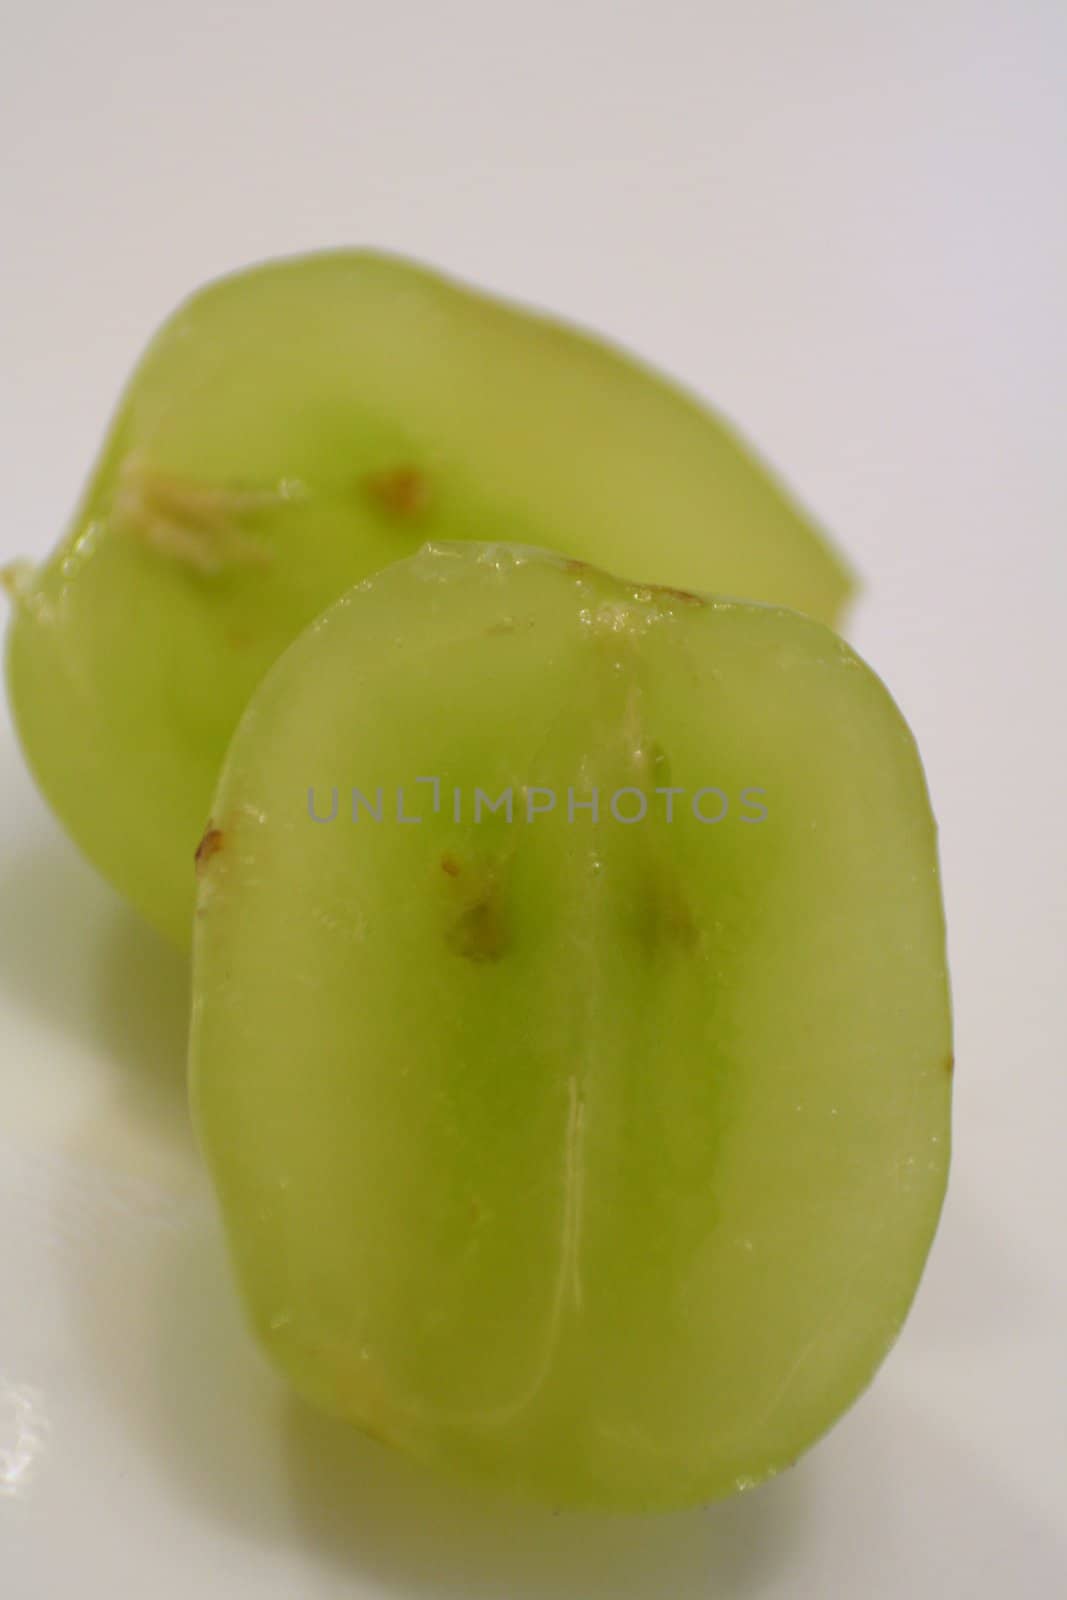 A very close up detail of a sliced grape on a white background.